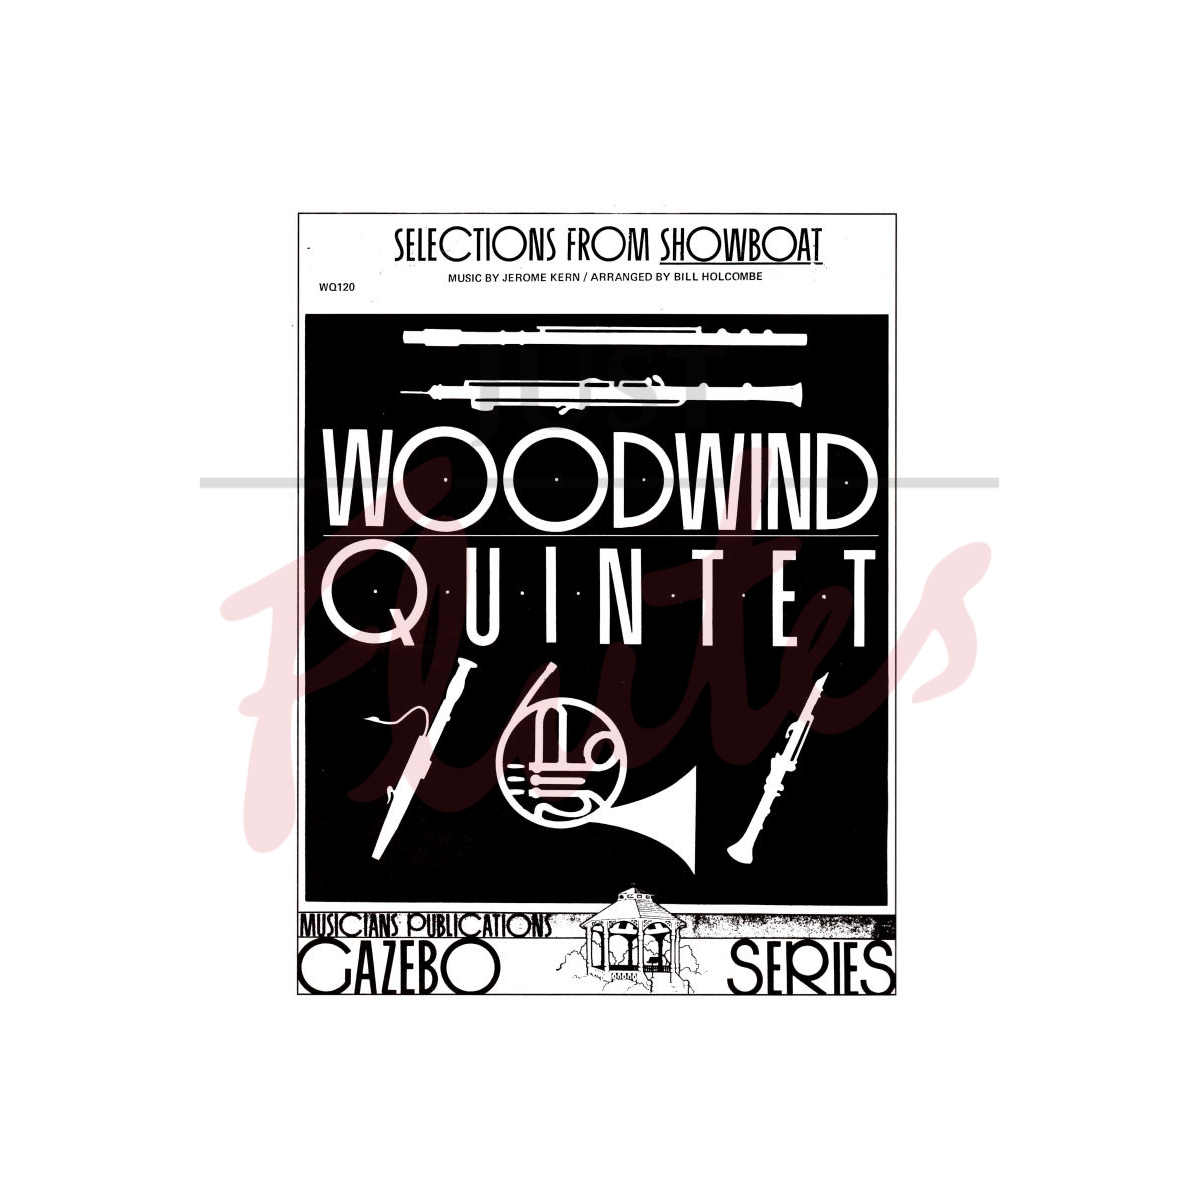 Selections from Showboat [Wind Quintet]